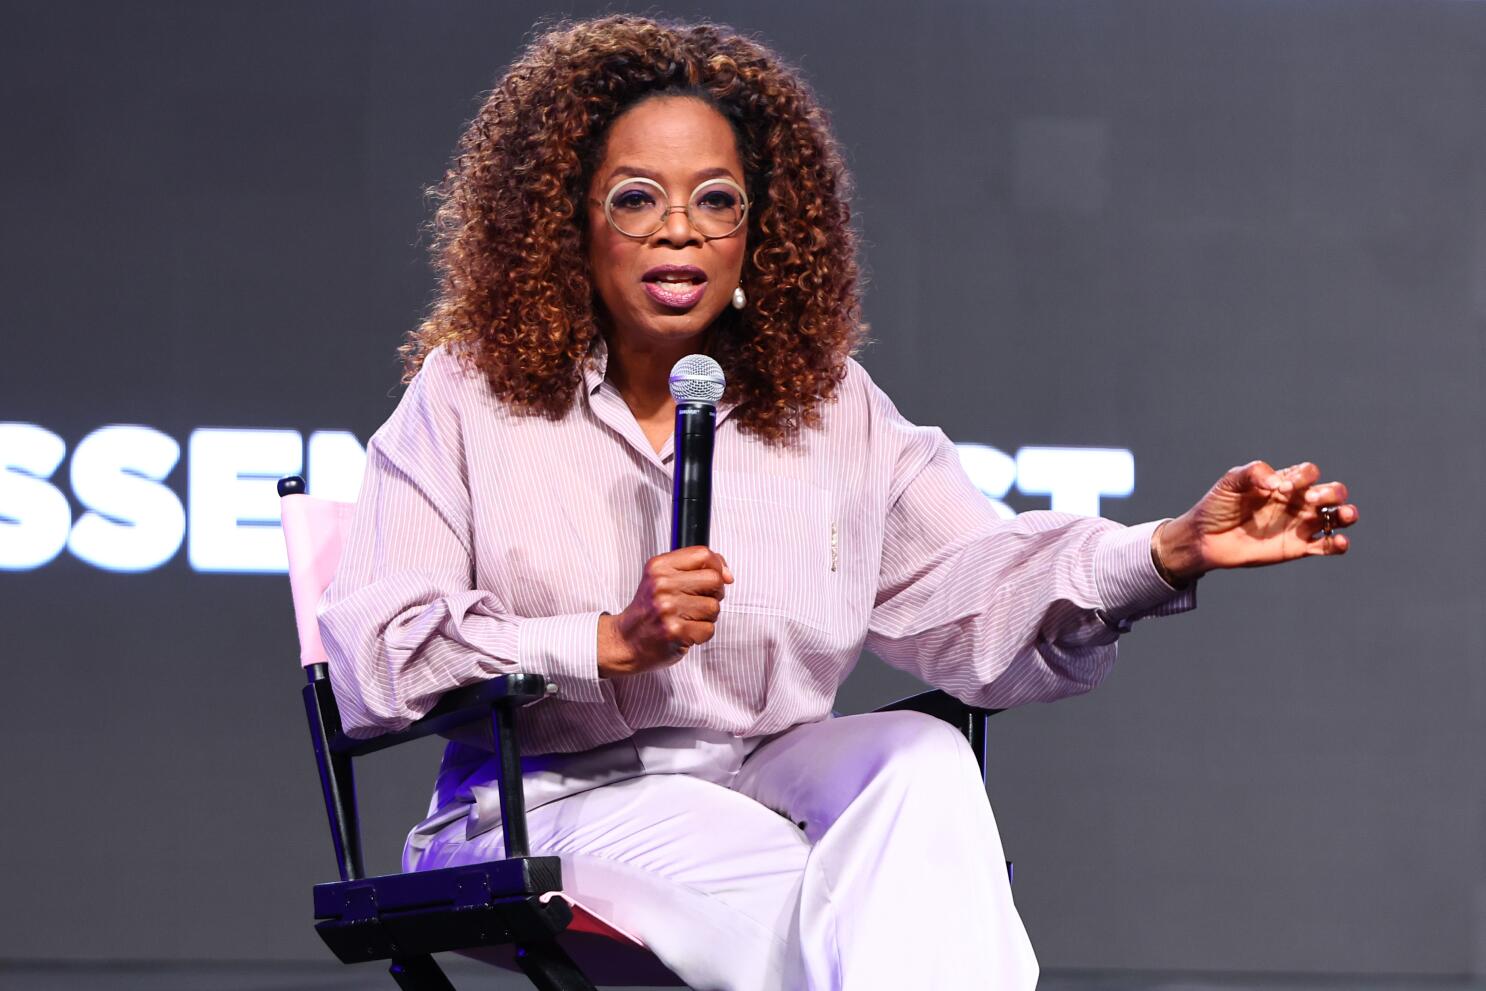  “Making Fun of My Weight Was a National Sport” Oprah Winfrey Discusses Past Fat-Shaming